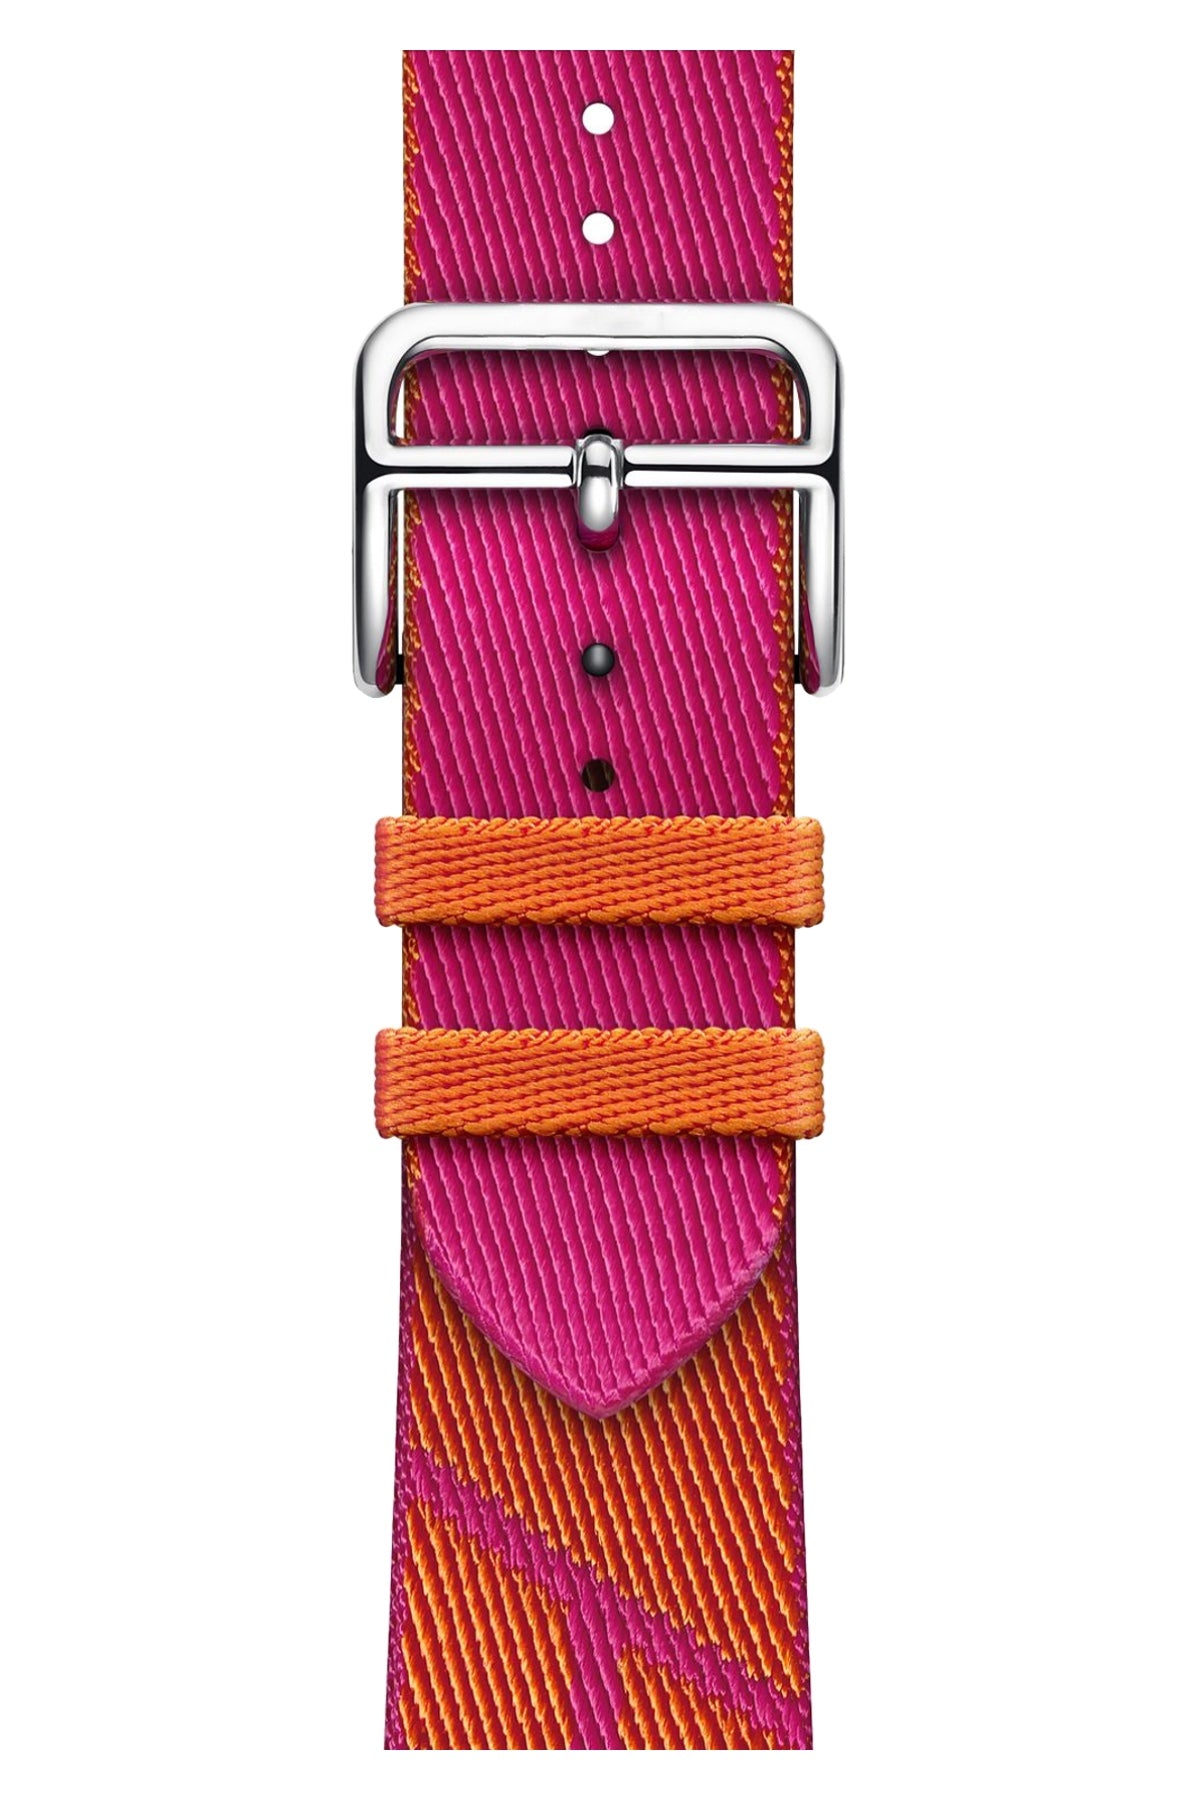 Apple Watch Compatible Simple Loop Knitted Band Taffy 